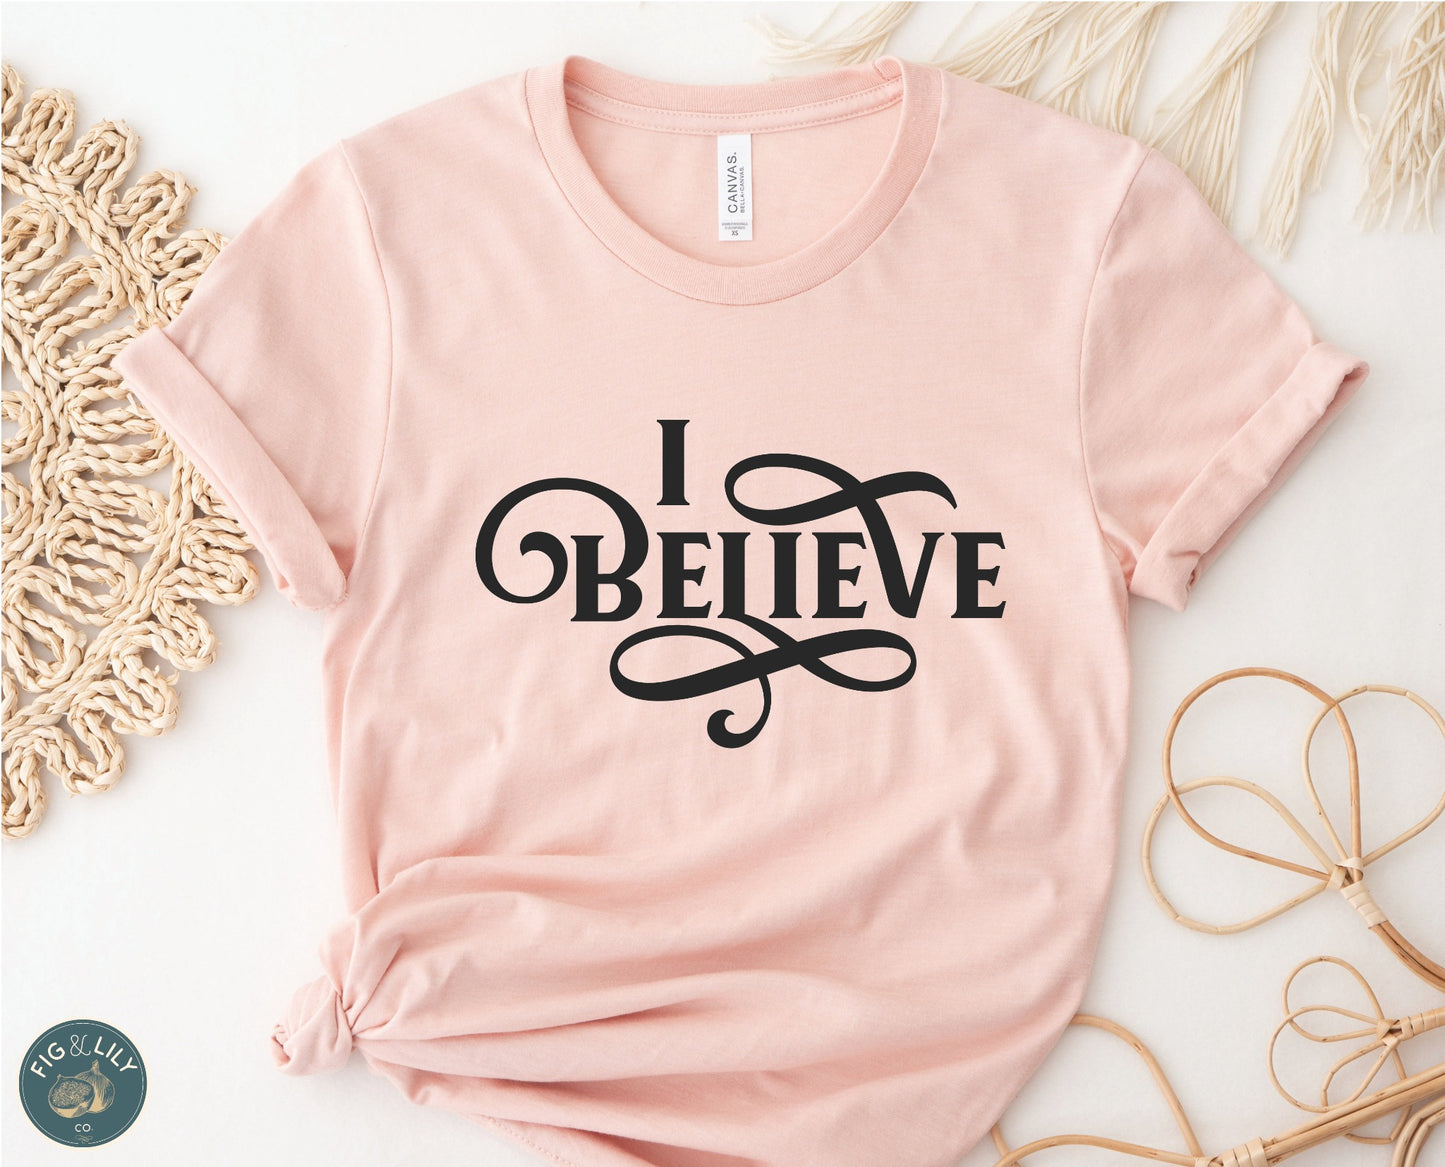 I Believe Swirl Christian aesthetic Jesus believer t-shirt design printed in black on soft heather prism peach tee for women, great gift for her